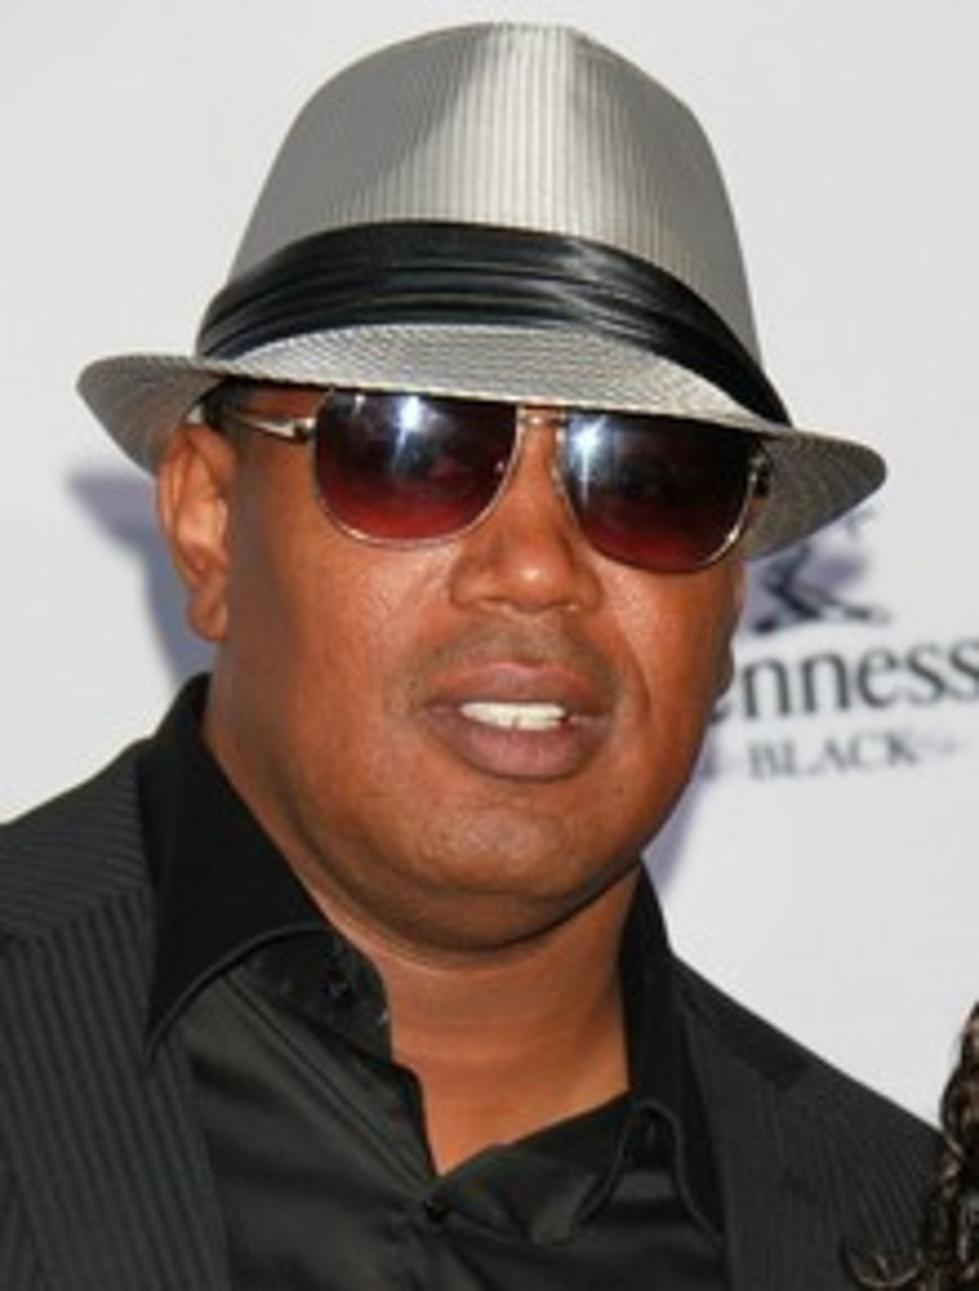 Woman From Fake Organization Uses Master P’s Name